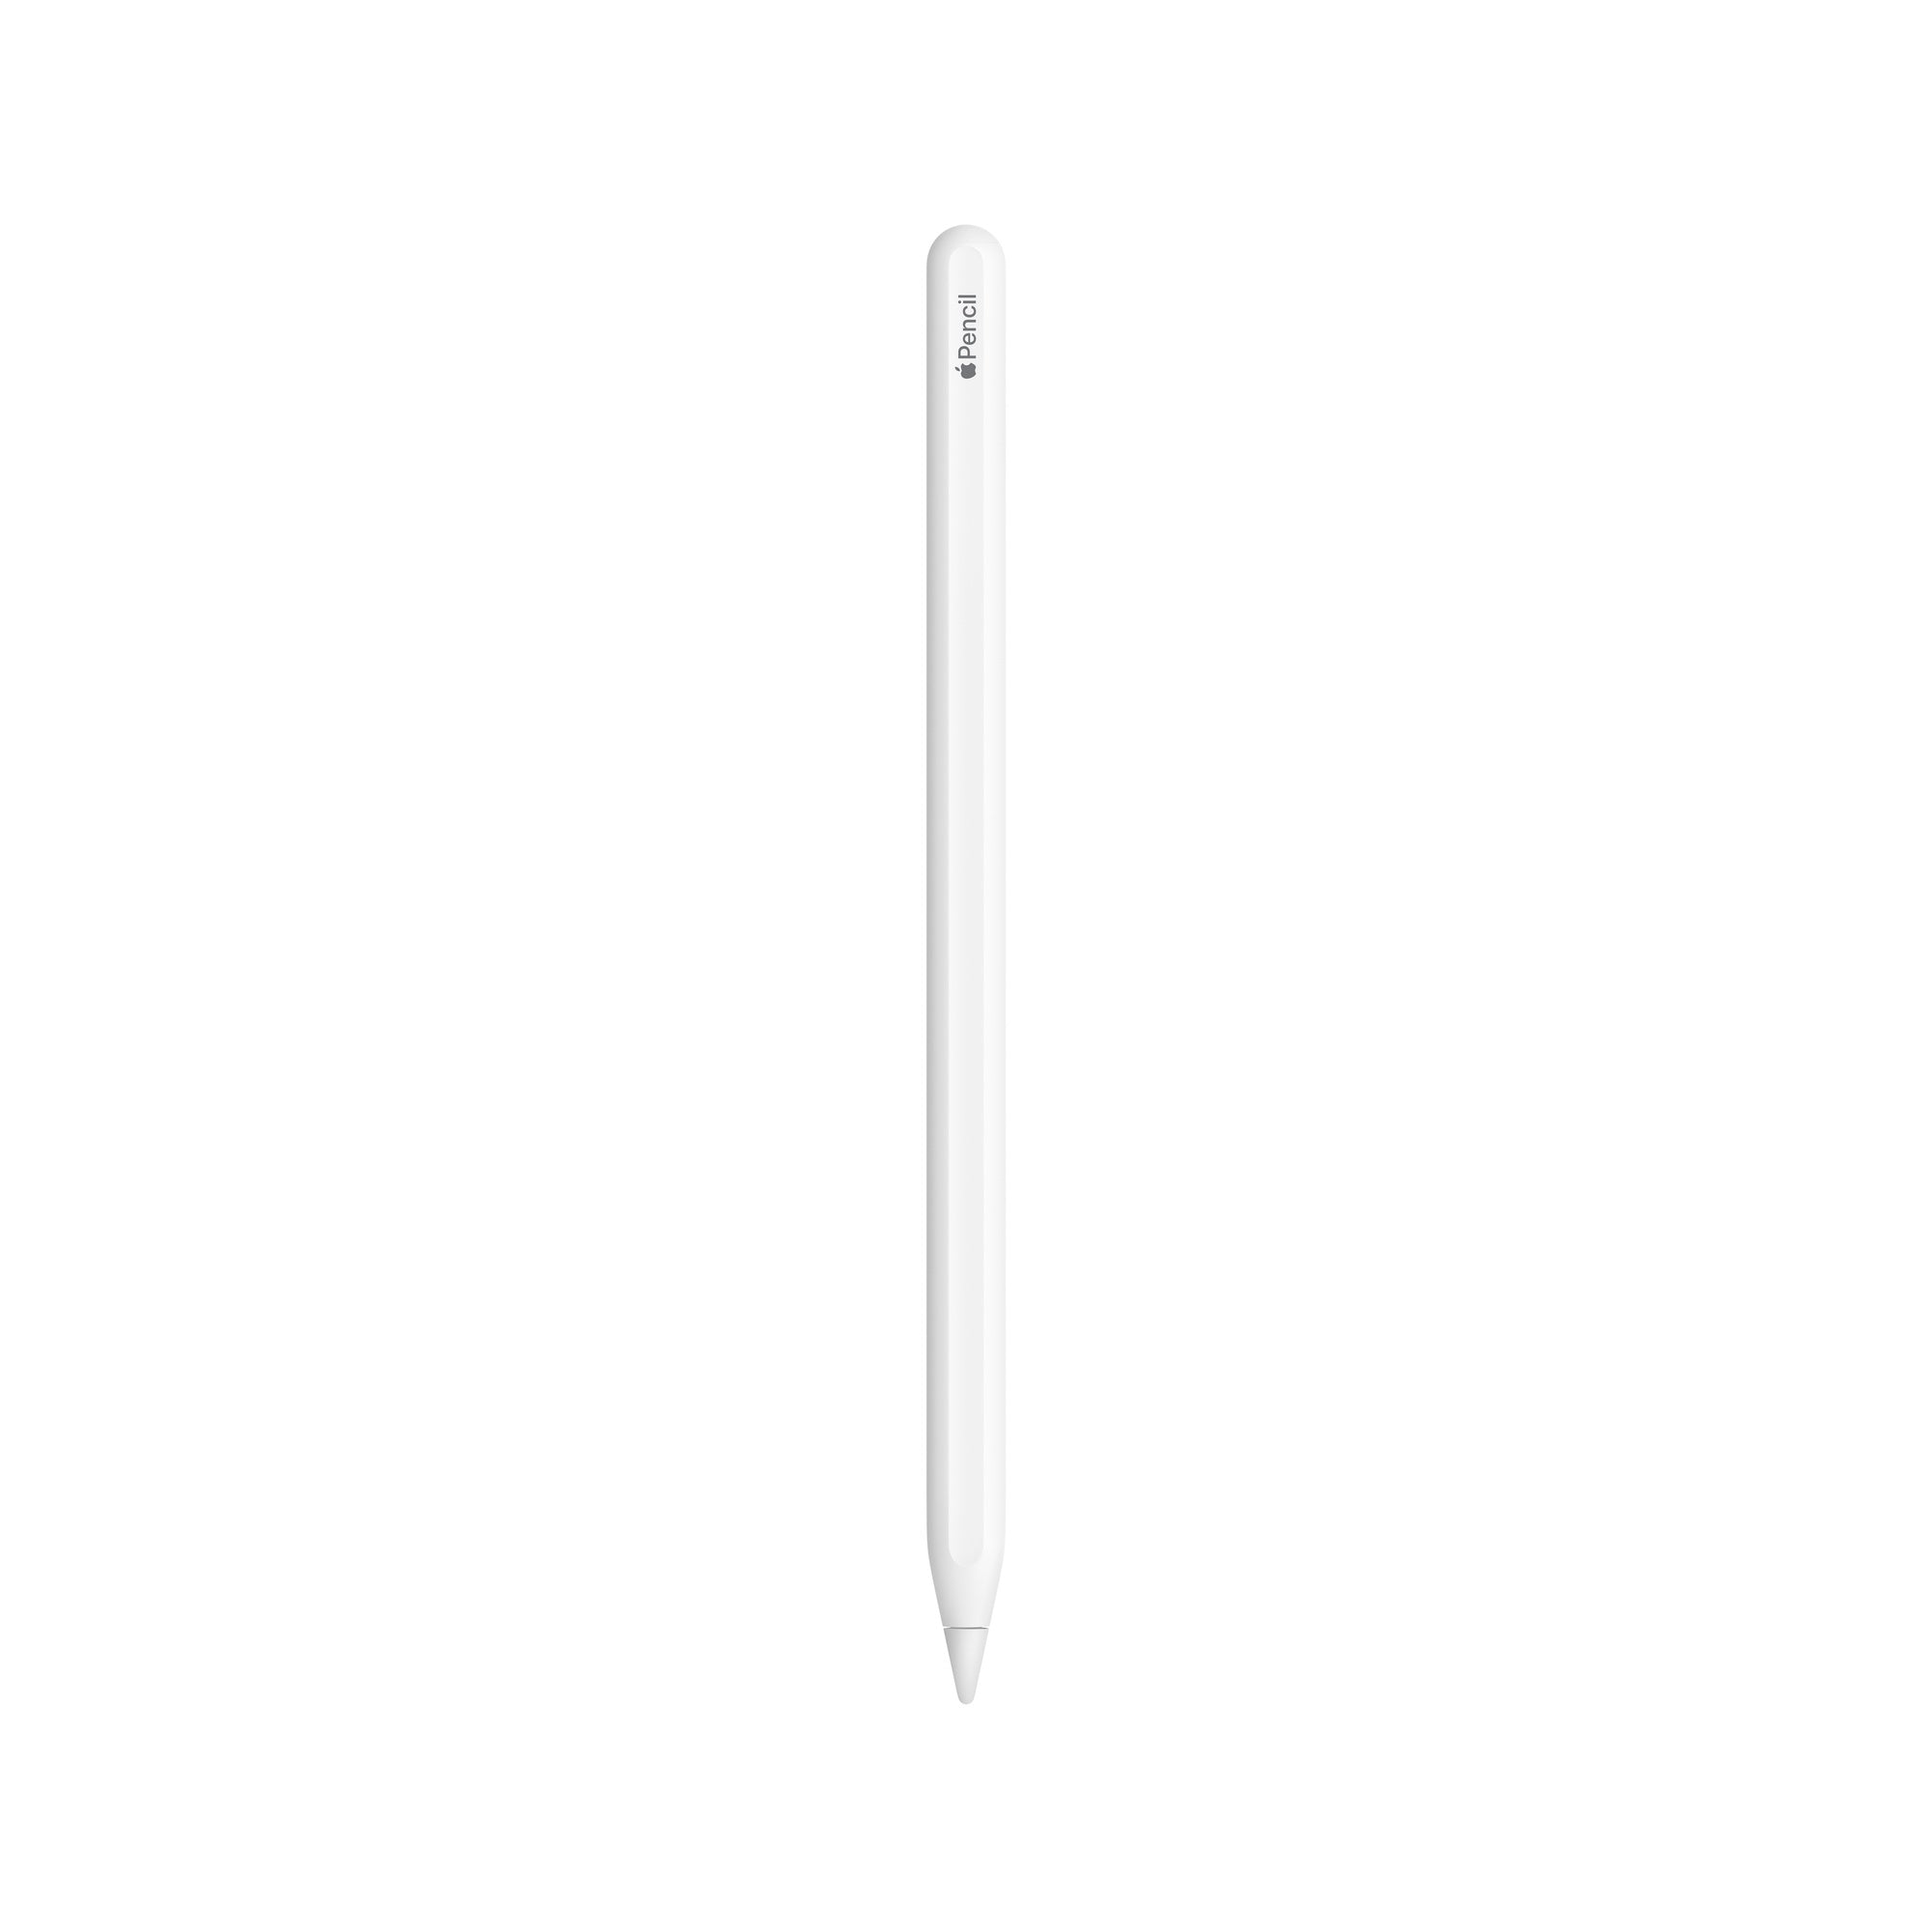 Apple - Pencil (2nd Generation) - White | A2051